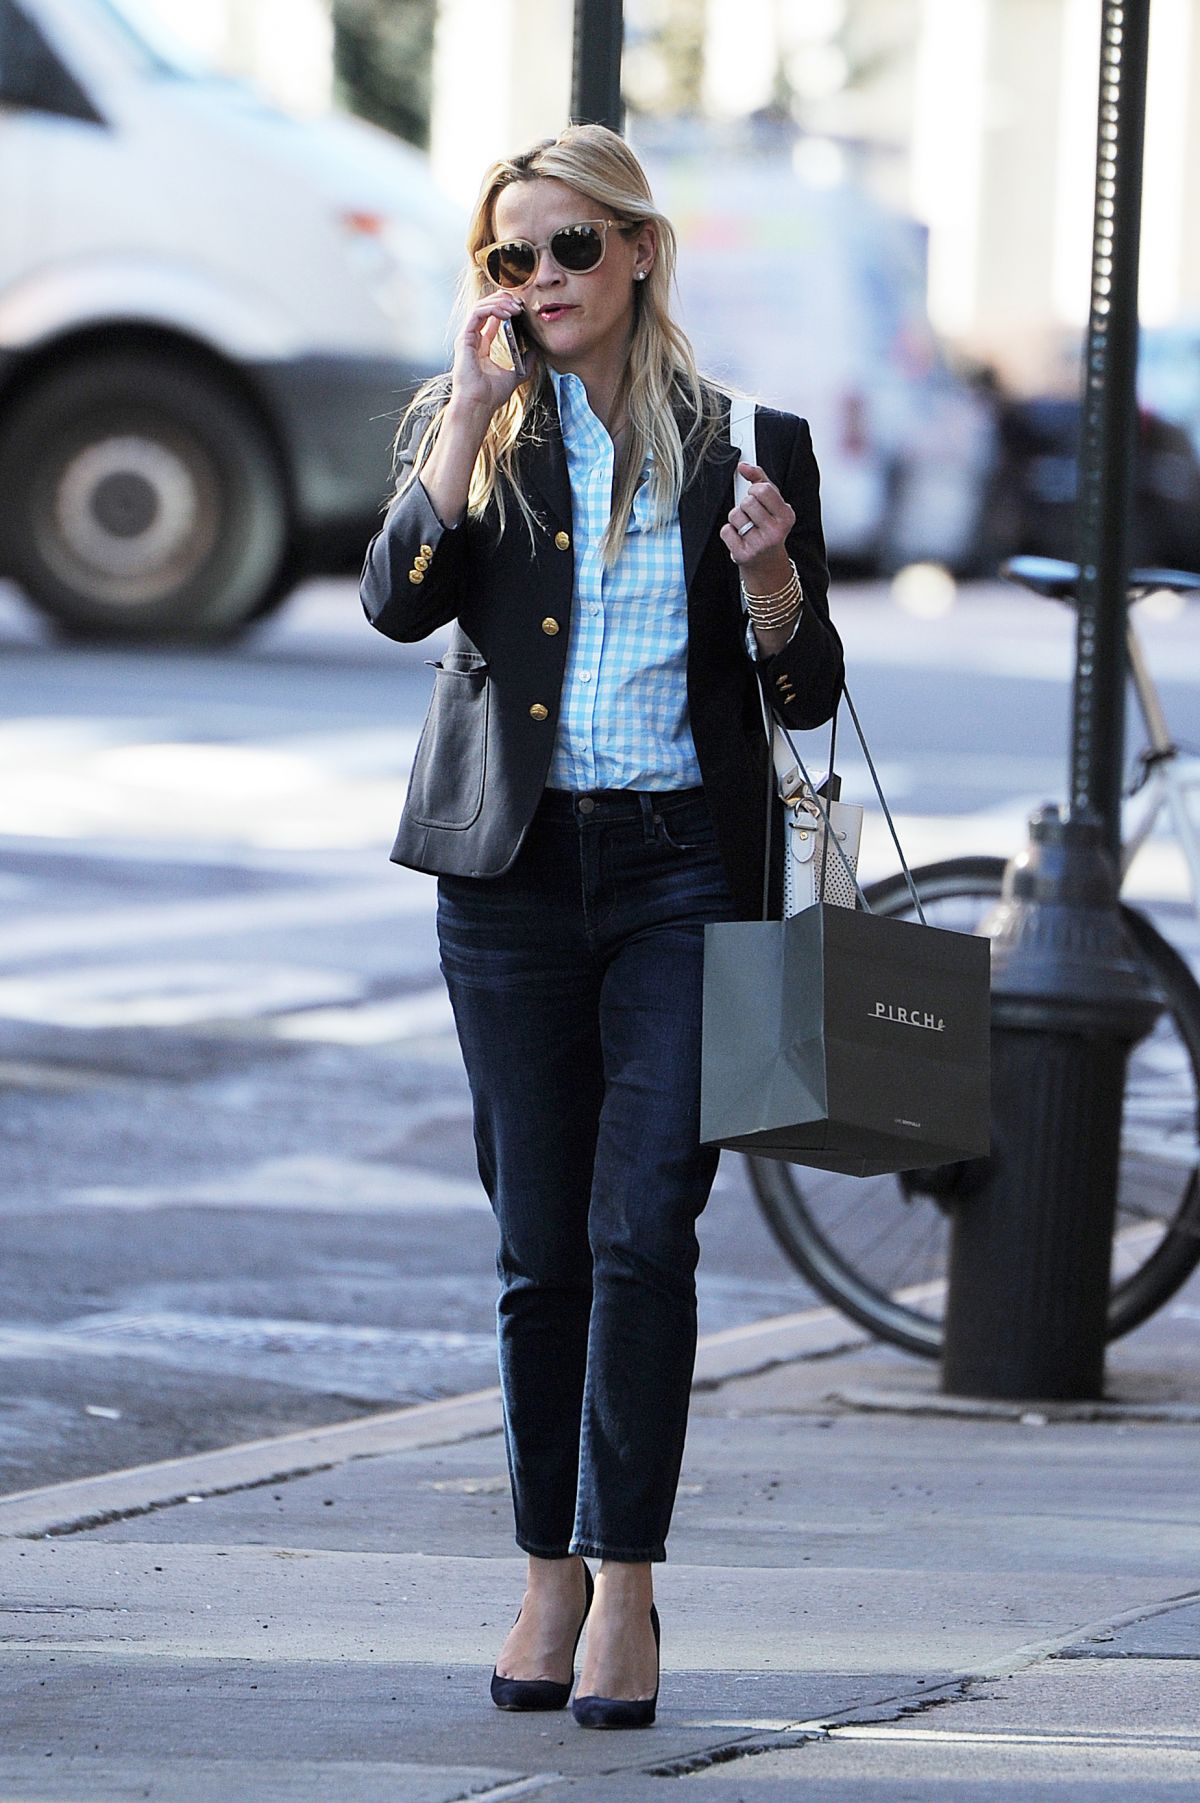 reese-witherspoon-shopping-in-new-york-city-61416-4.jpg